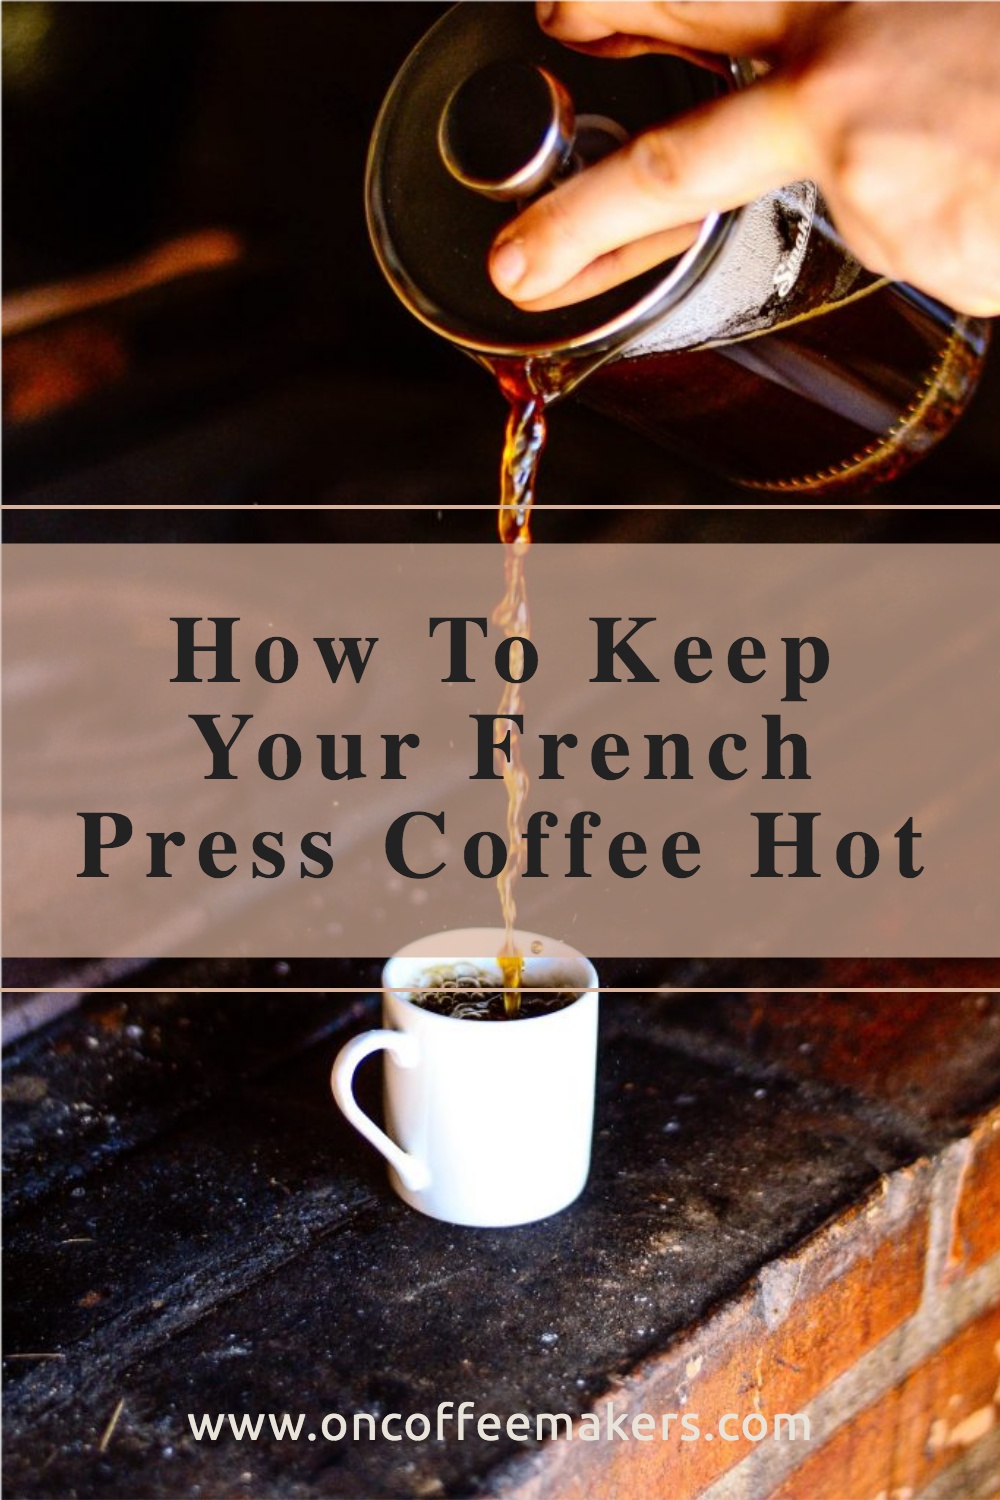 https://www.oncoffeemakers.com/images/How-To-Keep-Your-French-Press-Coffee-Hot.jpg